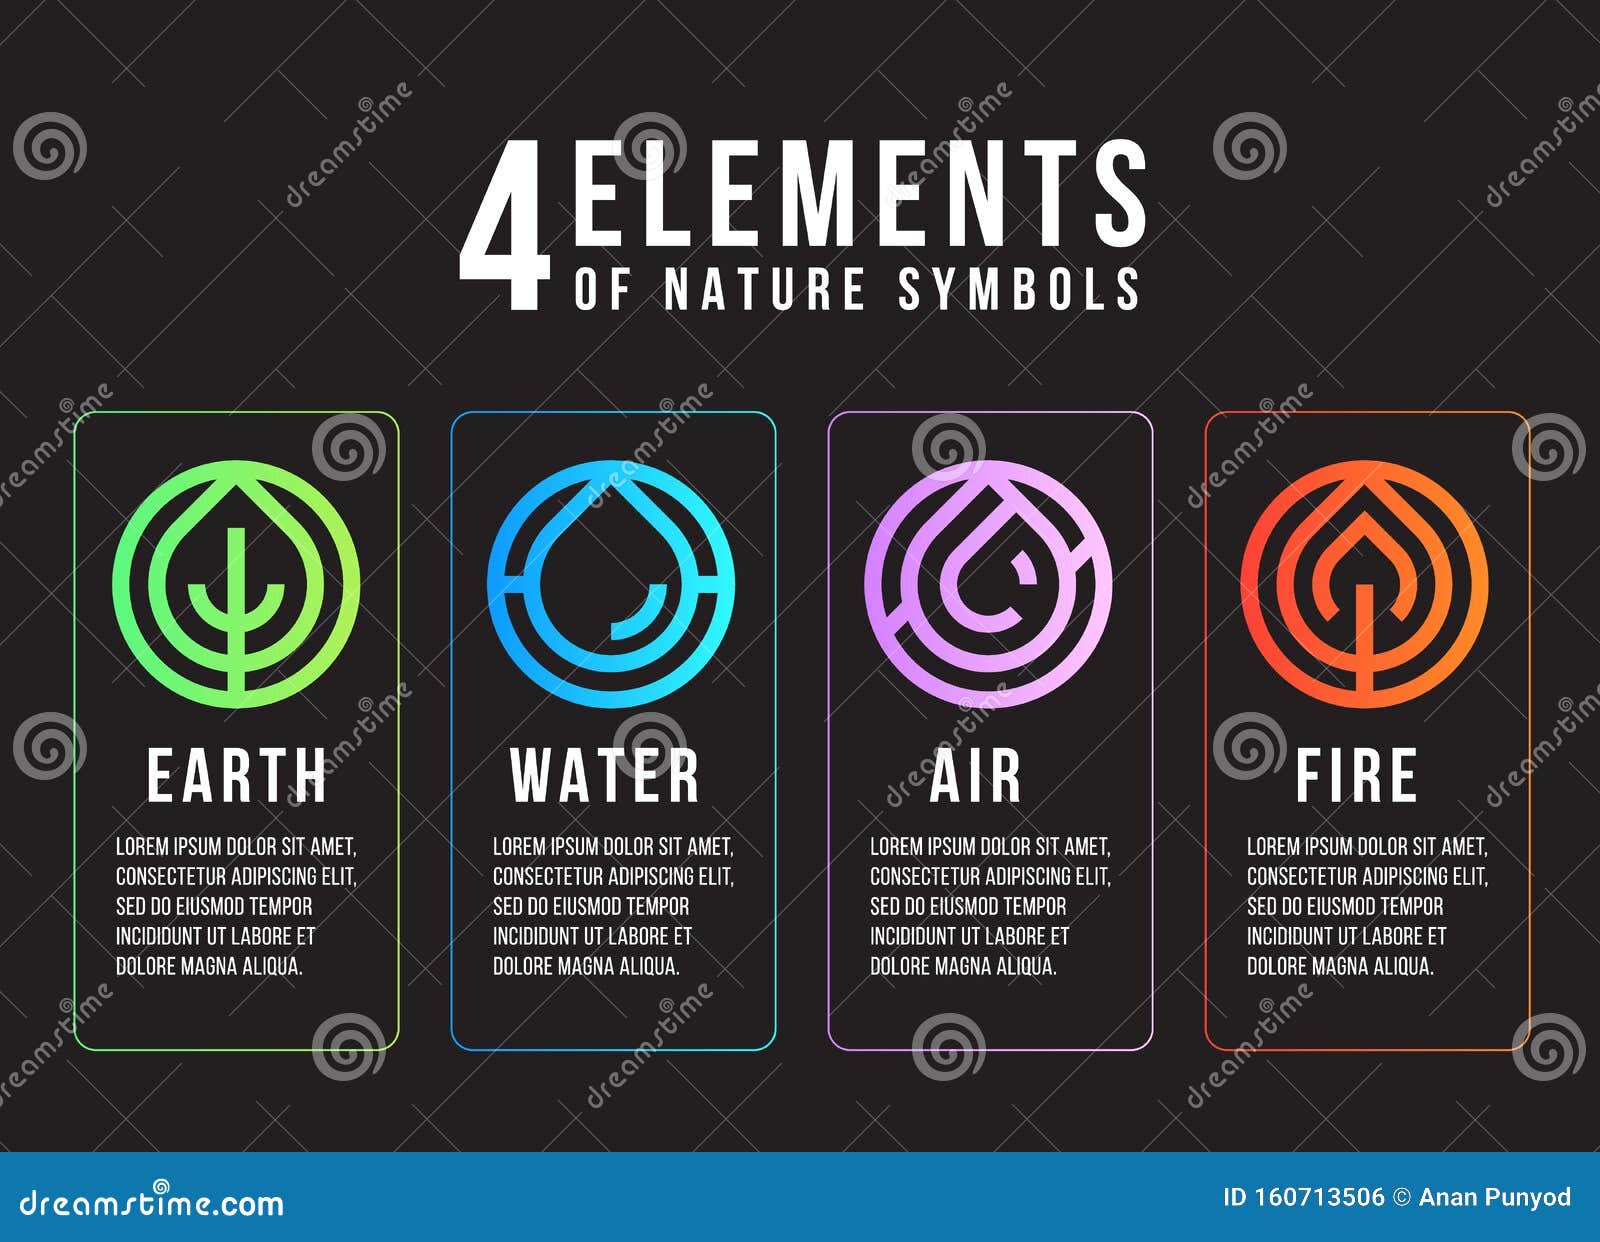 4 elements of nature